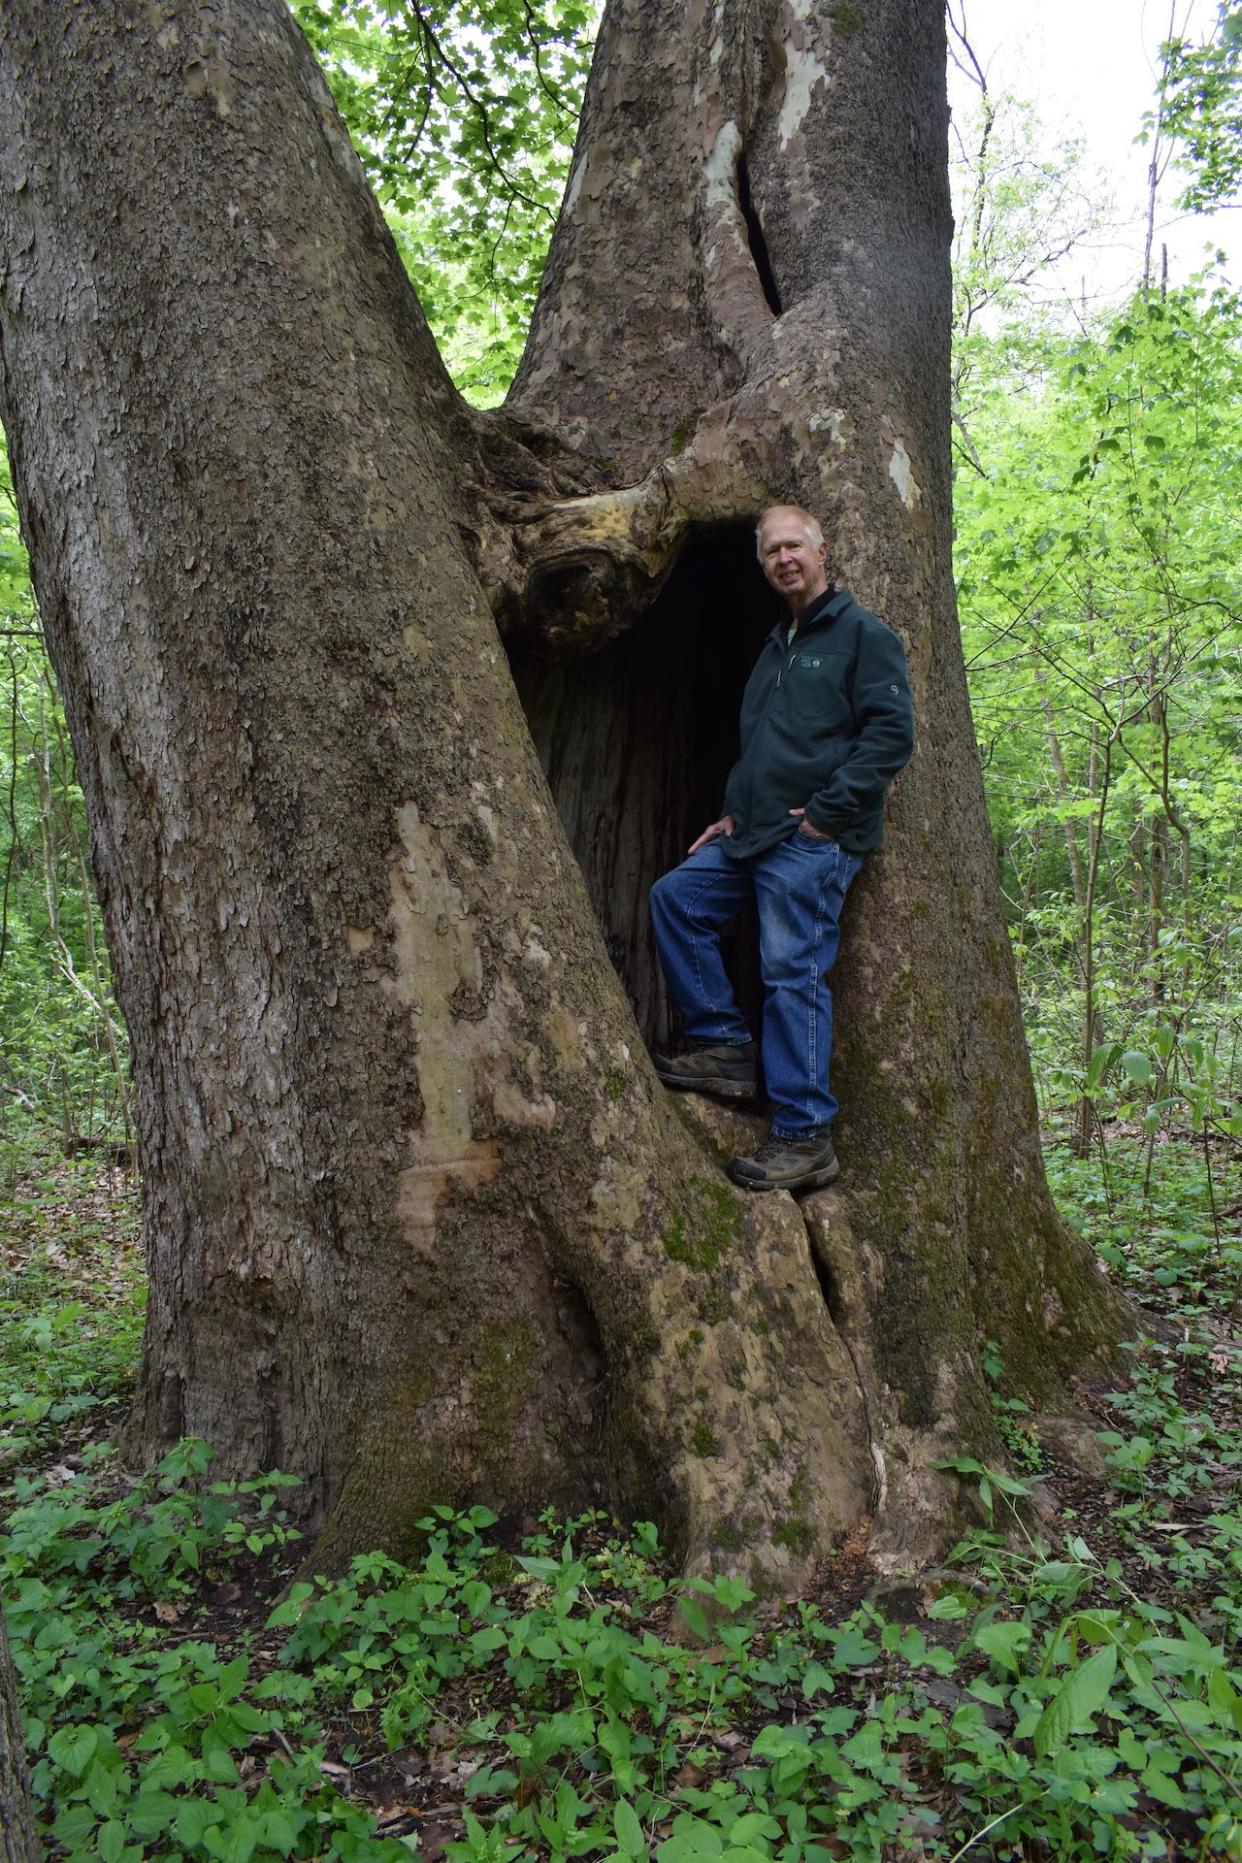 Author Carroll D. Ritter of Williams stands in a giant sycamore tree in Johnson County, near Trafalgar. The tree is one of 74 of the state's biggest and oldest trees he writes about in his book, "Magnificent Trees of Indiana." Ritter will sign copies of the book May 7 from 10 a.m. to noon at the Lawrence County Museum of History.